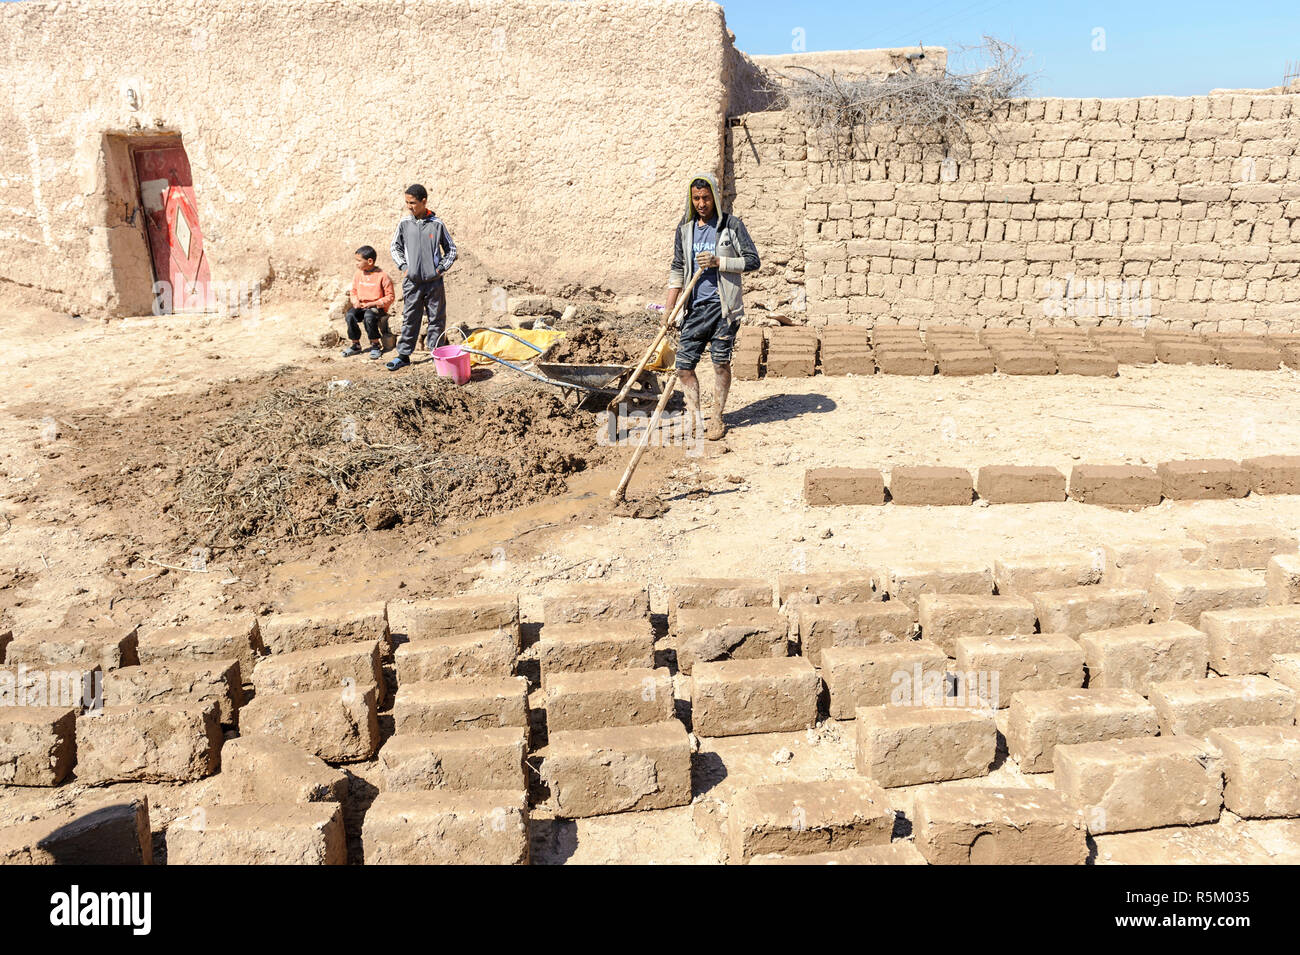 01-03-15, Marrakech, Morocco. Making bricks from mud and straw in the sub-Atlas Berber region. Bricks drying in the sun. Photo: © Simon Grosset Stock Photo